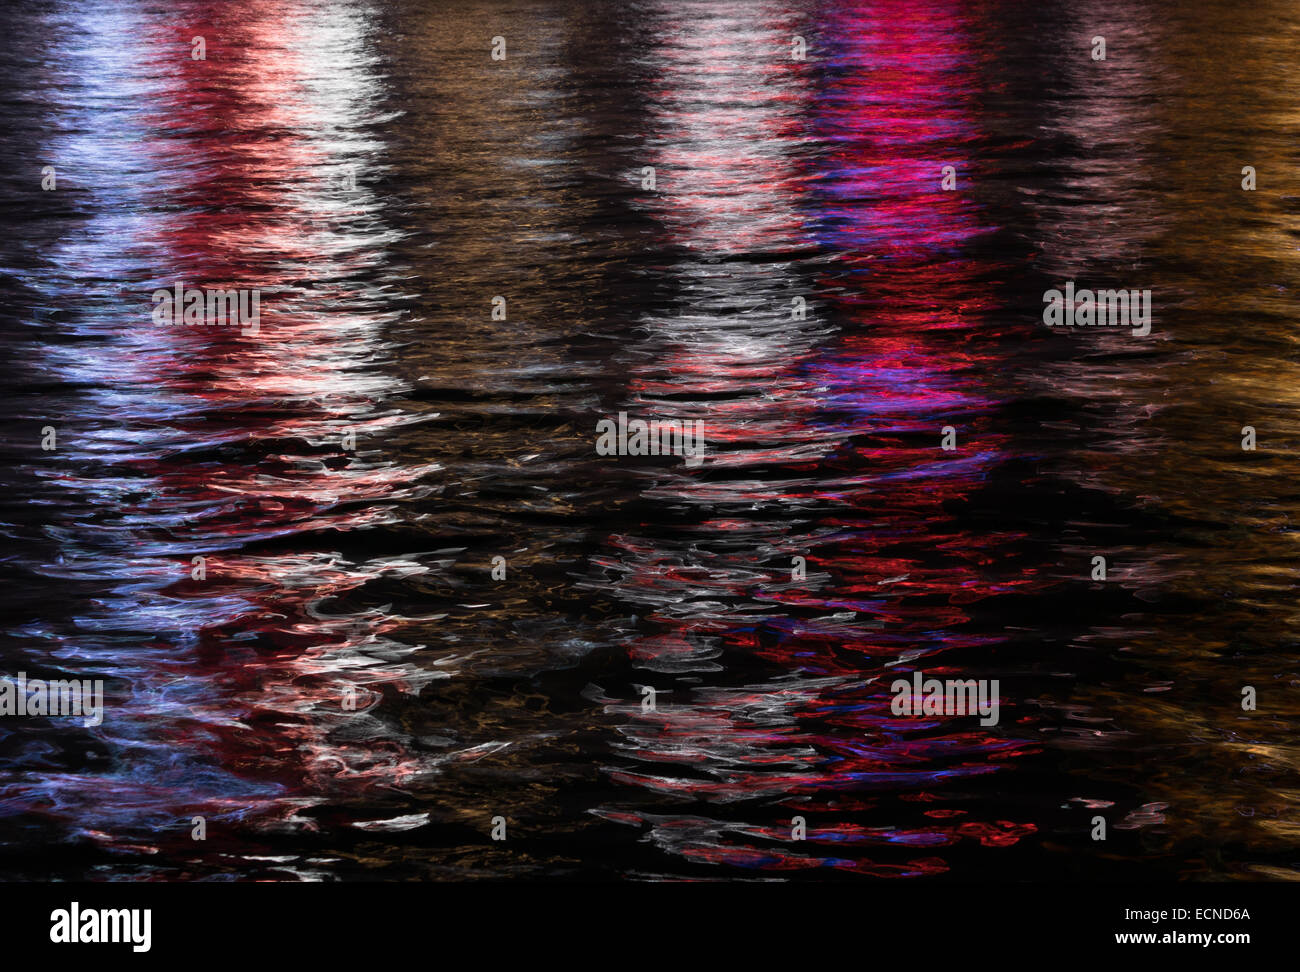 Reflection of city lights in Kowloon Bay, Hong Kong.  Shimmer and stripes produce an artistic abstract oil painting like effect. Stock Photo